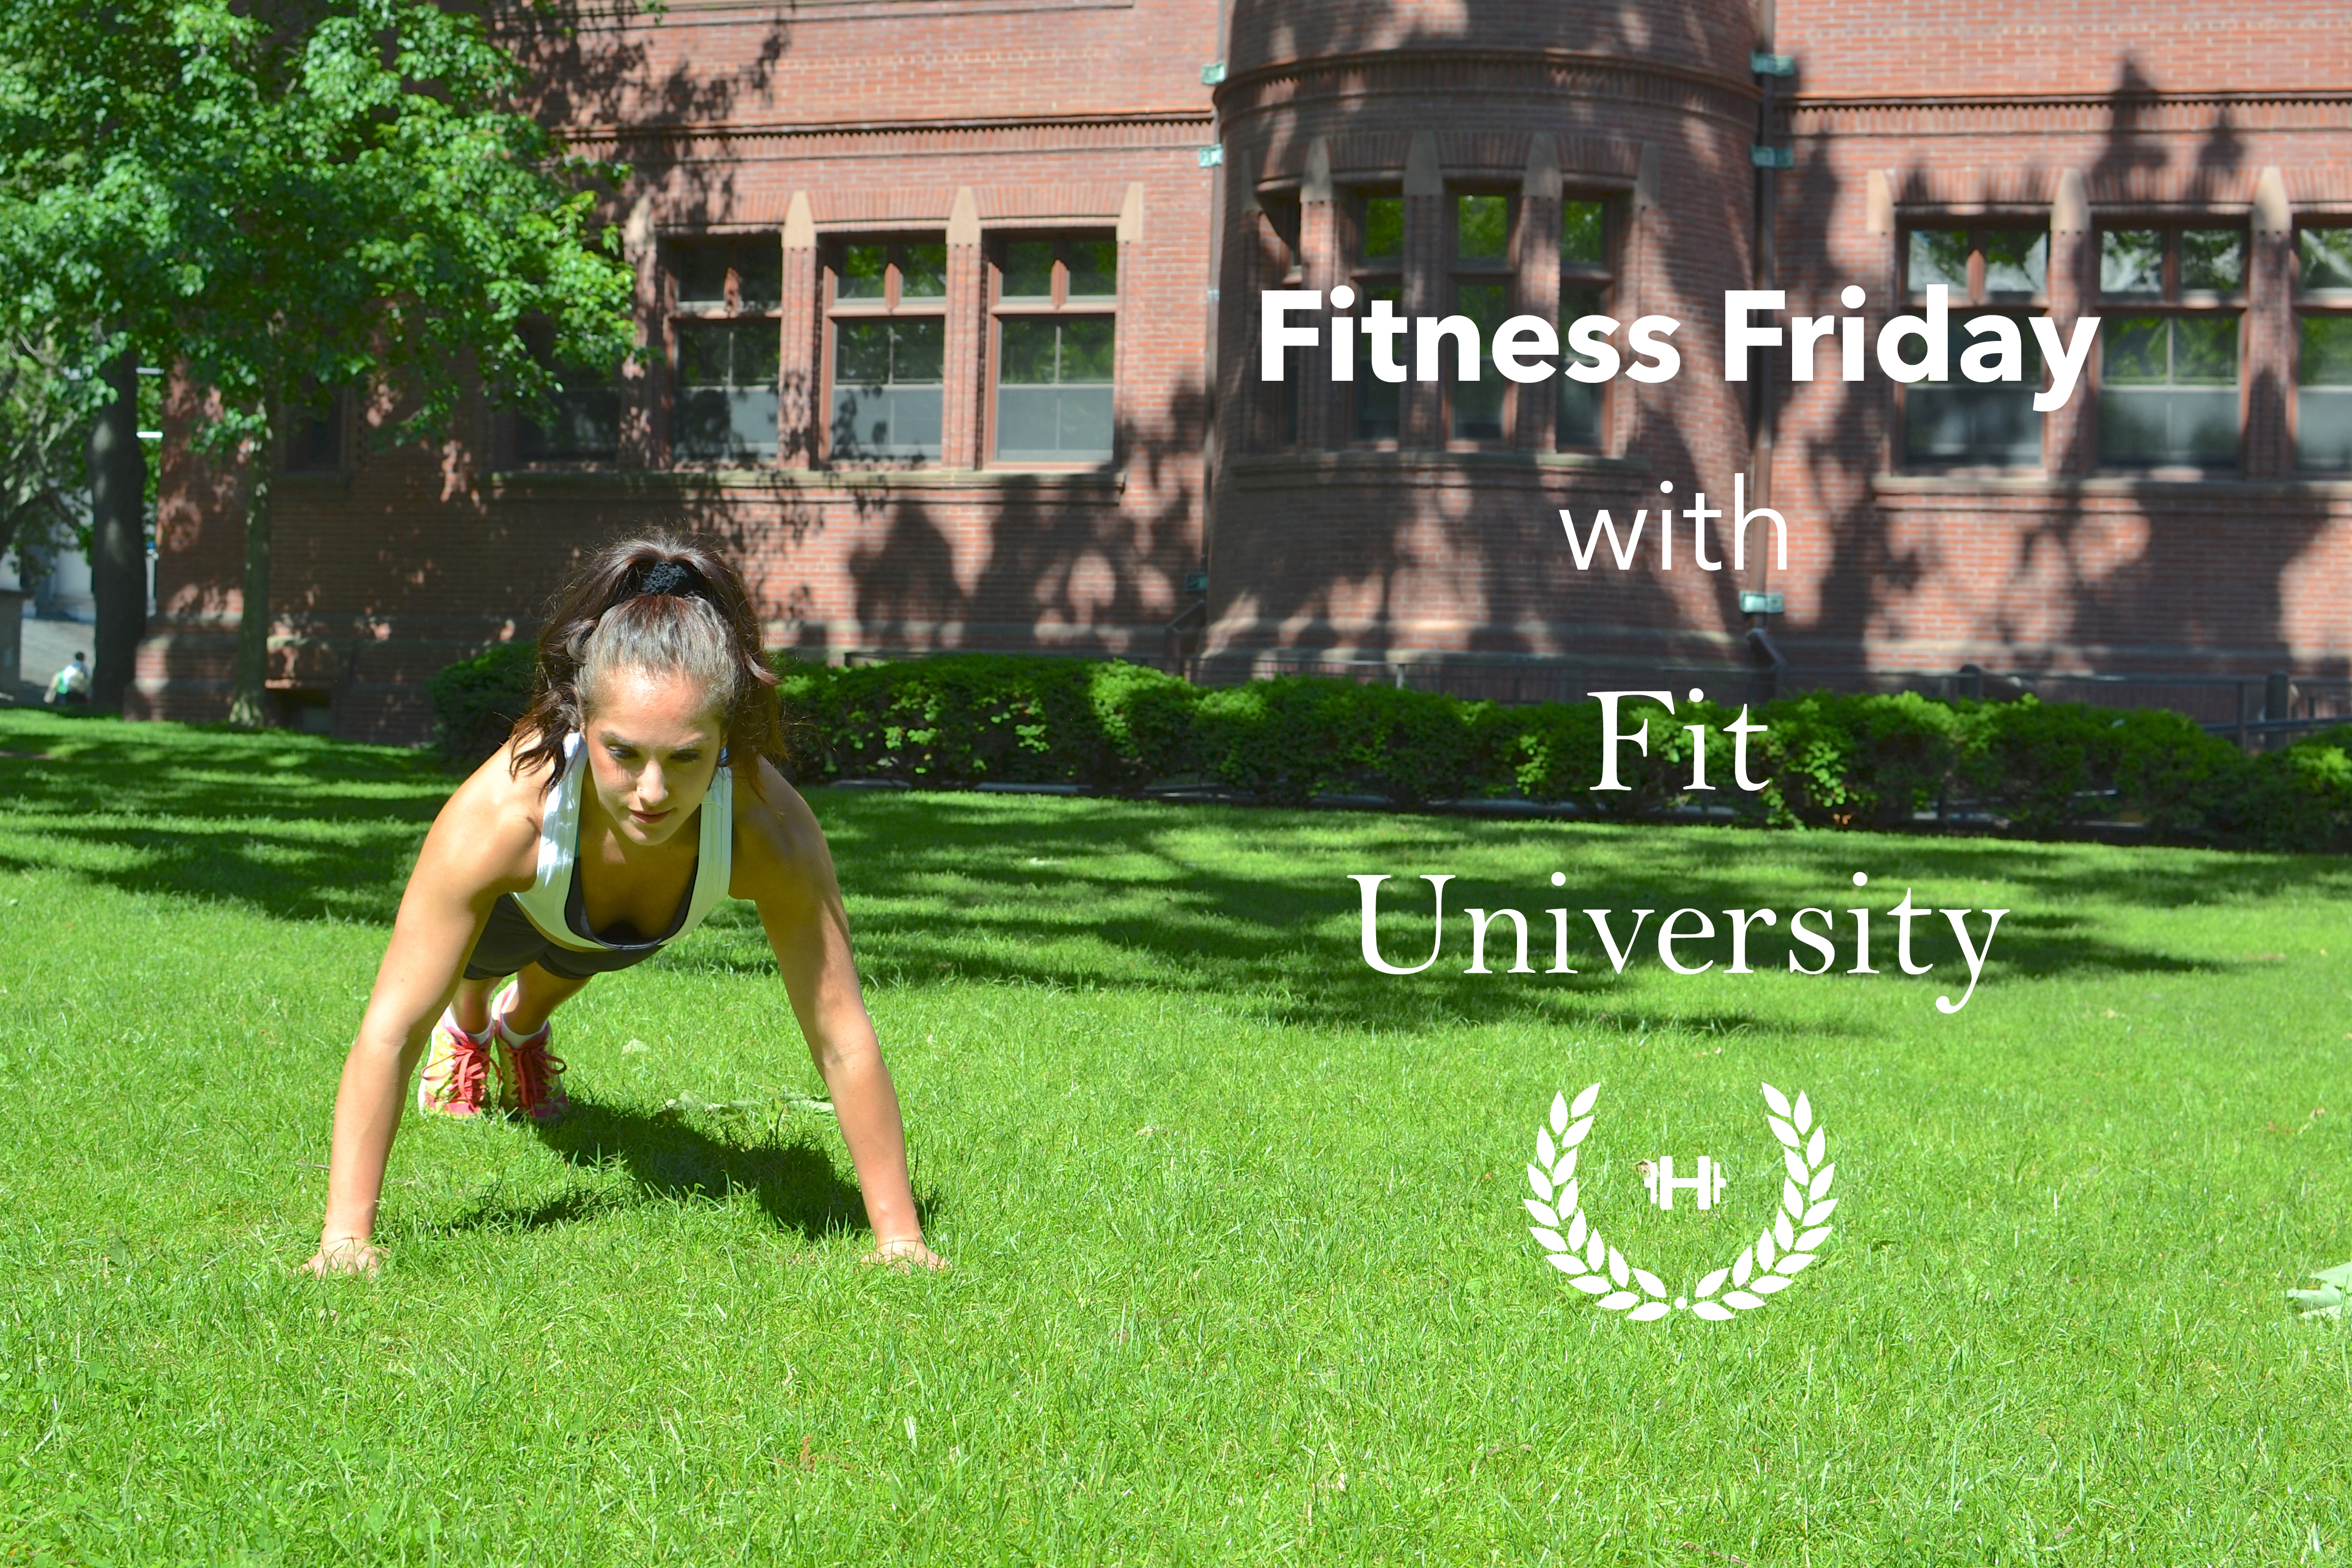 Fitness Friday with Fit University